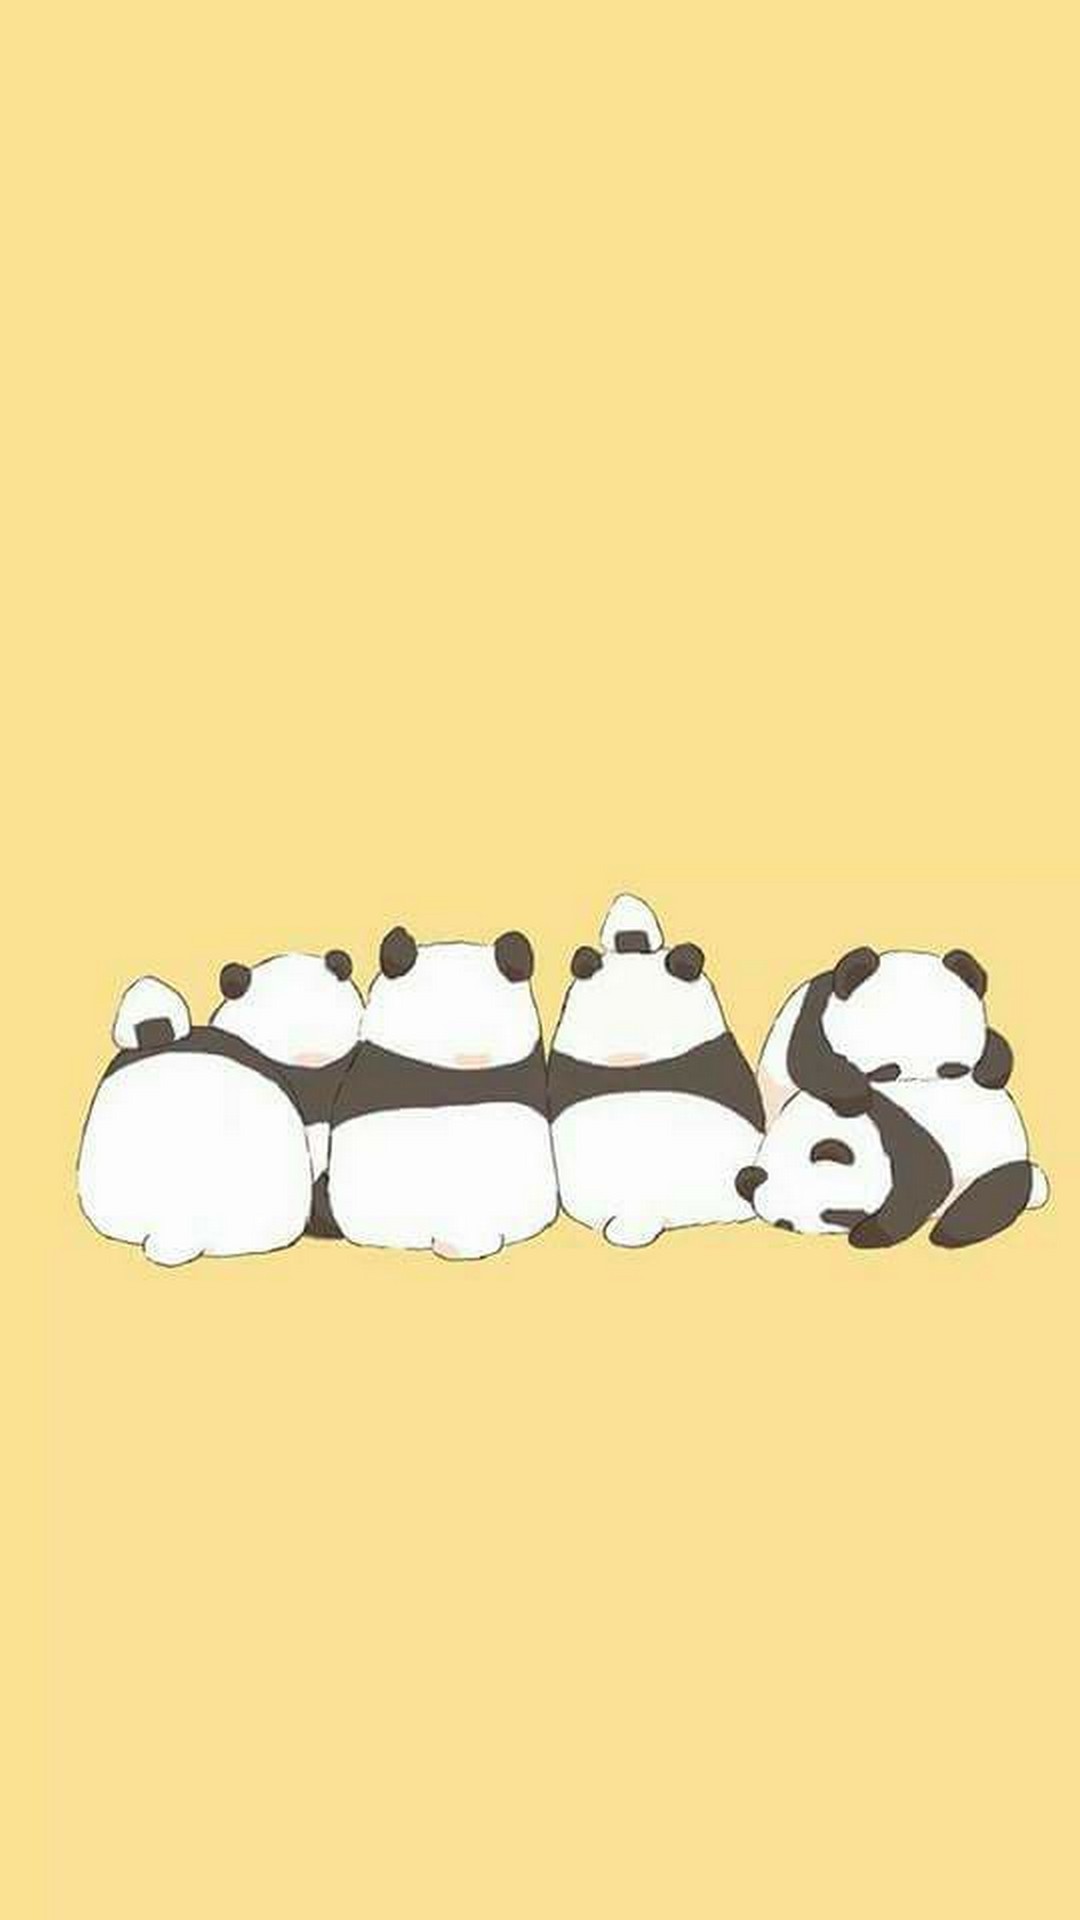 Panda HD Wallpapers For Mobile Resolution 1080x1920